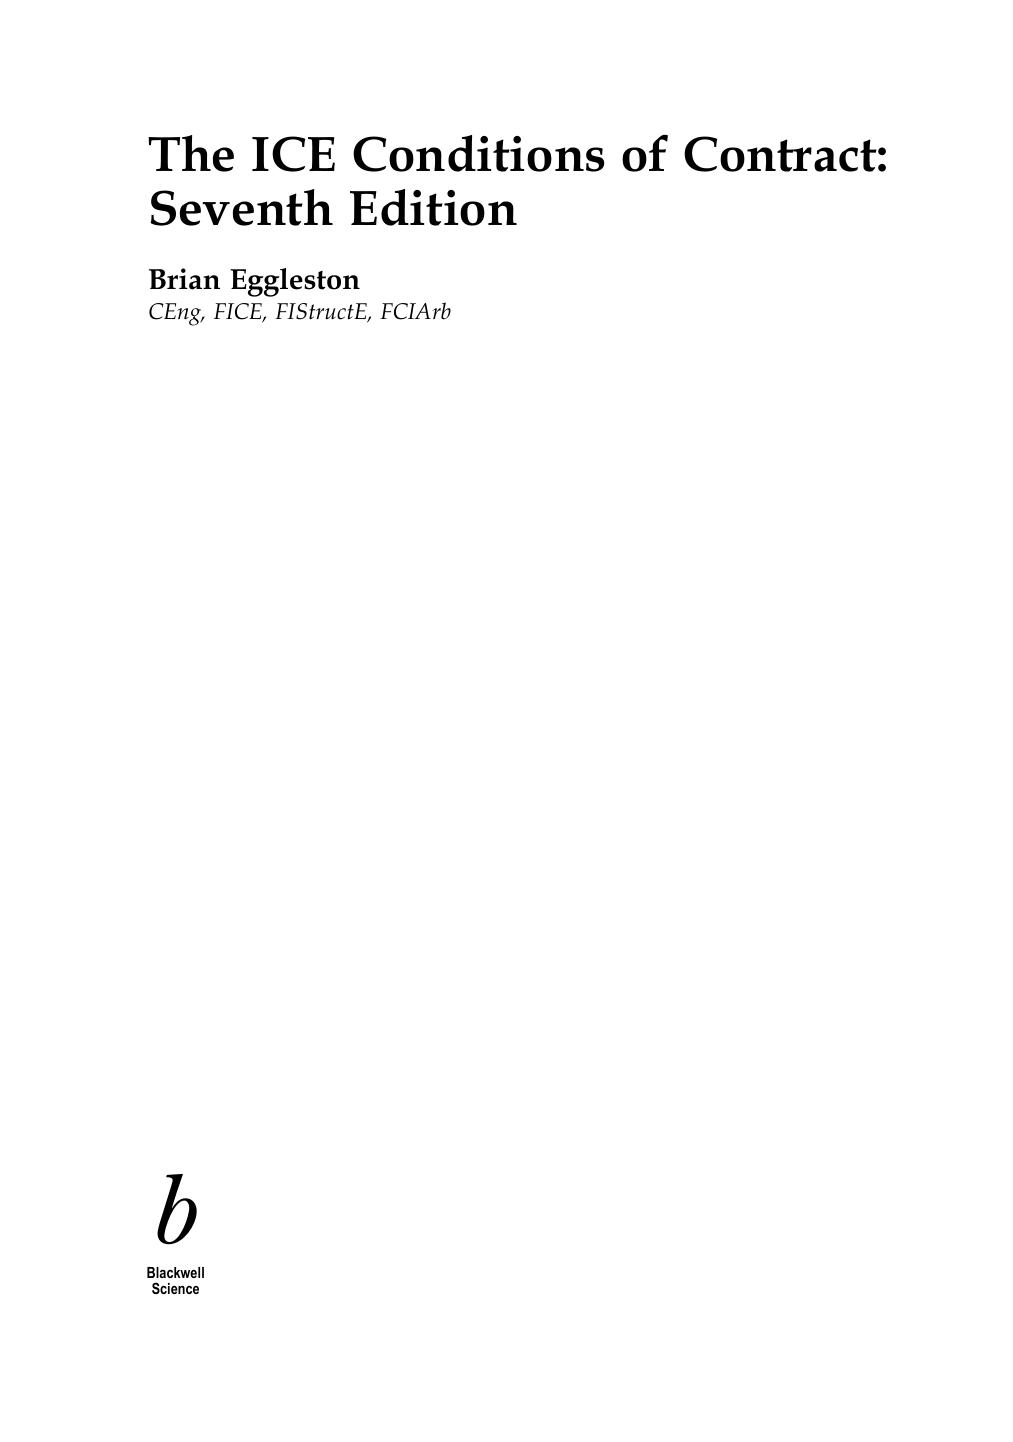 The ICE conditions of contract  seventh edition 2001